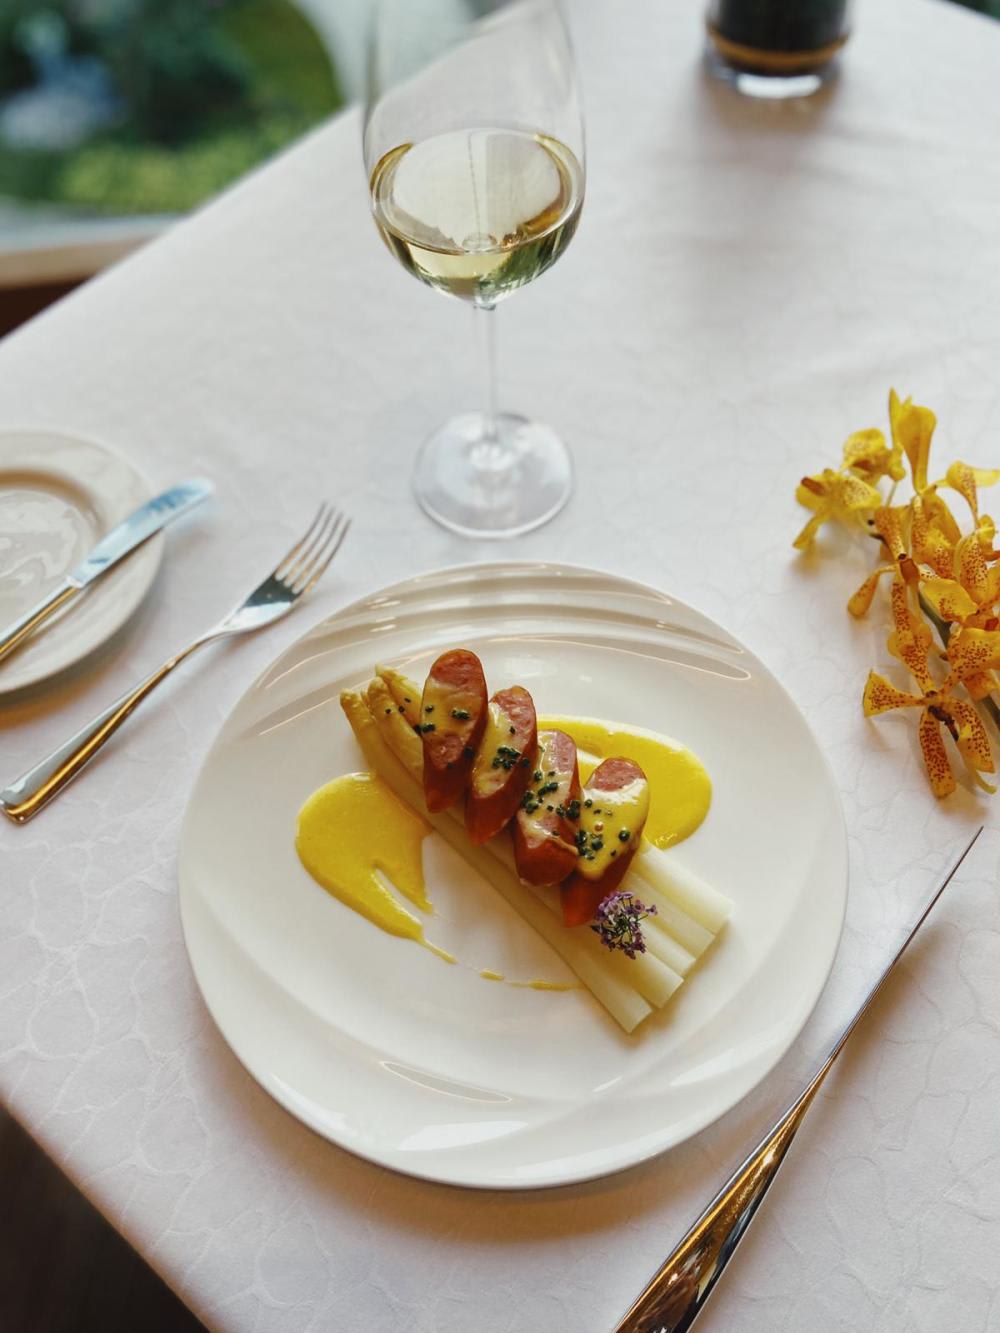 German white asparagus paired with Riesling